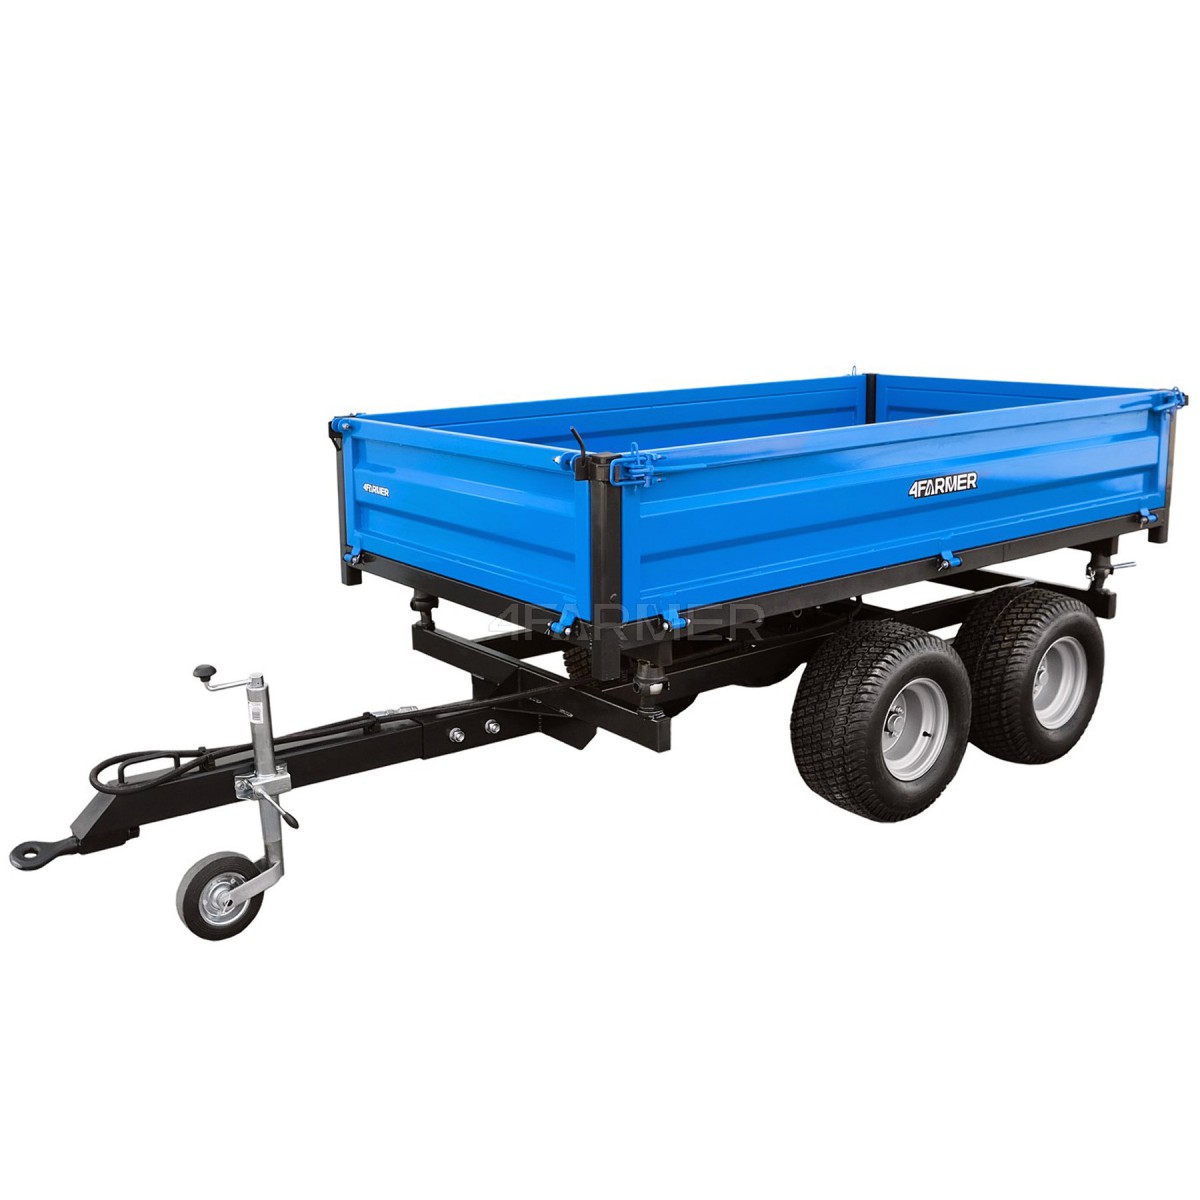 Two-axle agricultural trailer 2.5T with a 4FARMER trailer